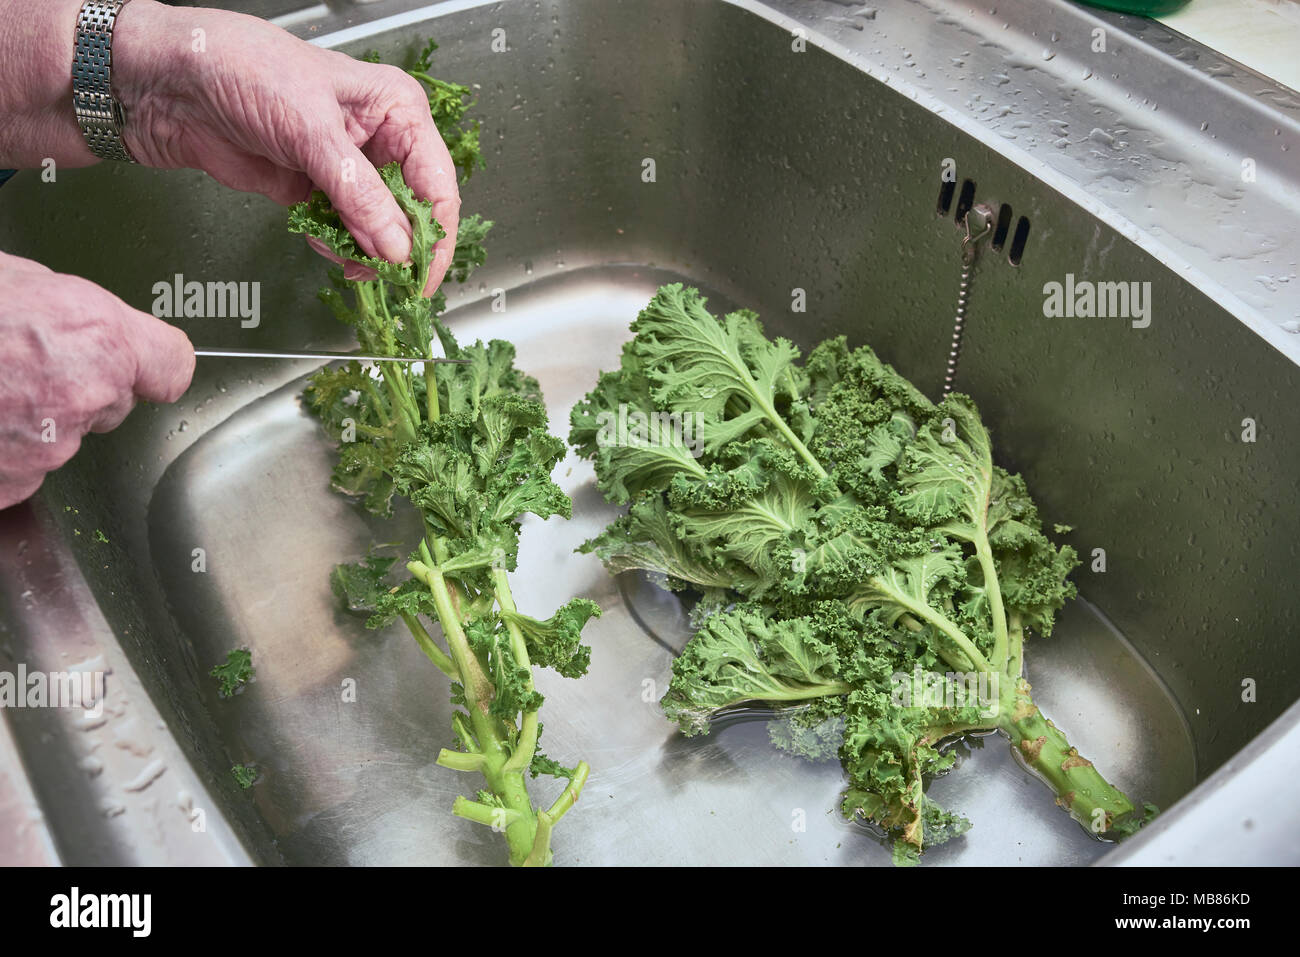 Lady washing Kale in a stainless steel sink Stock Photo